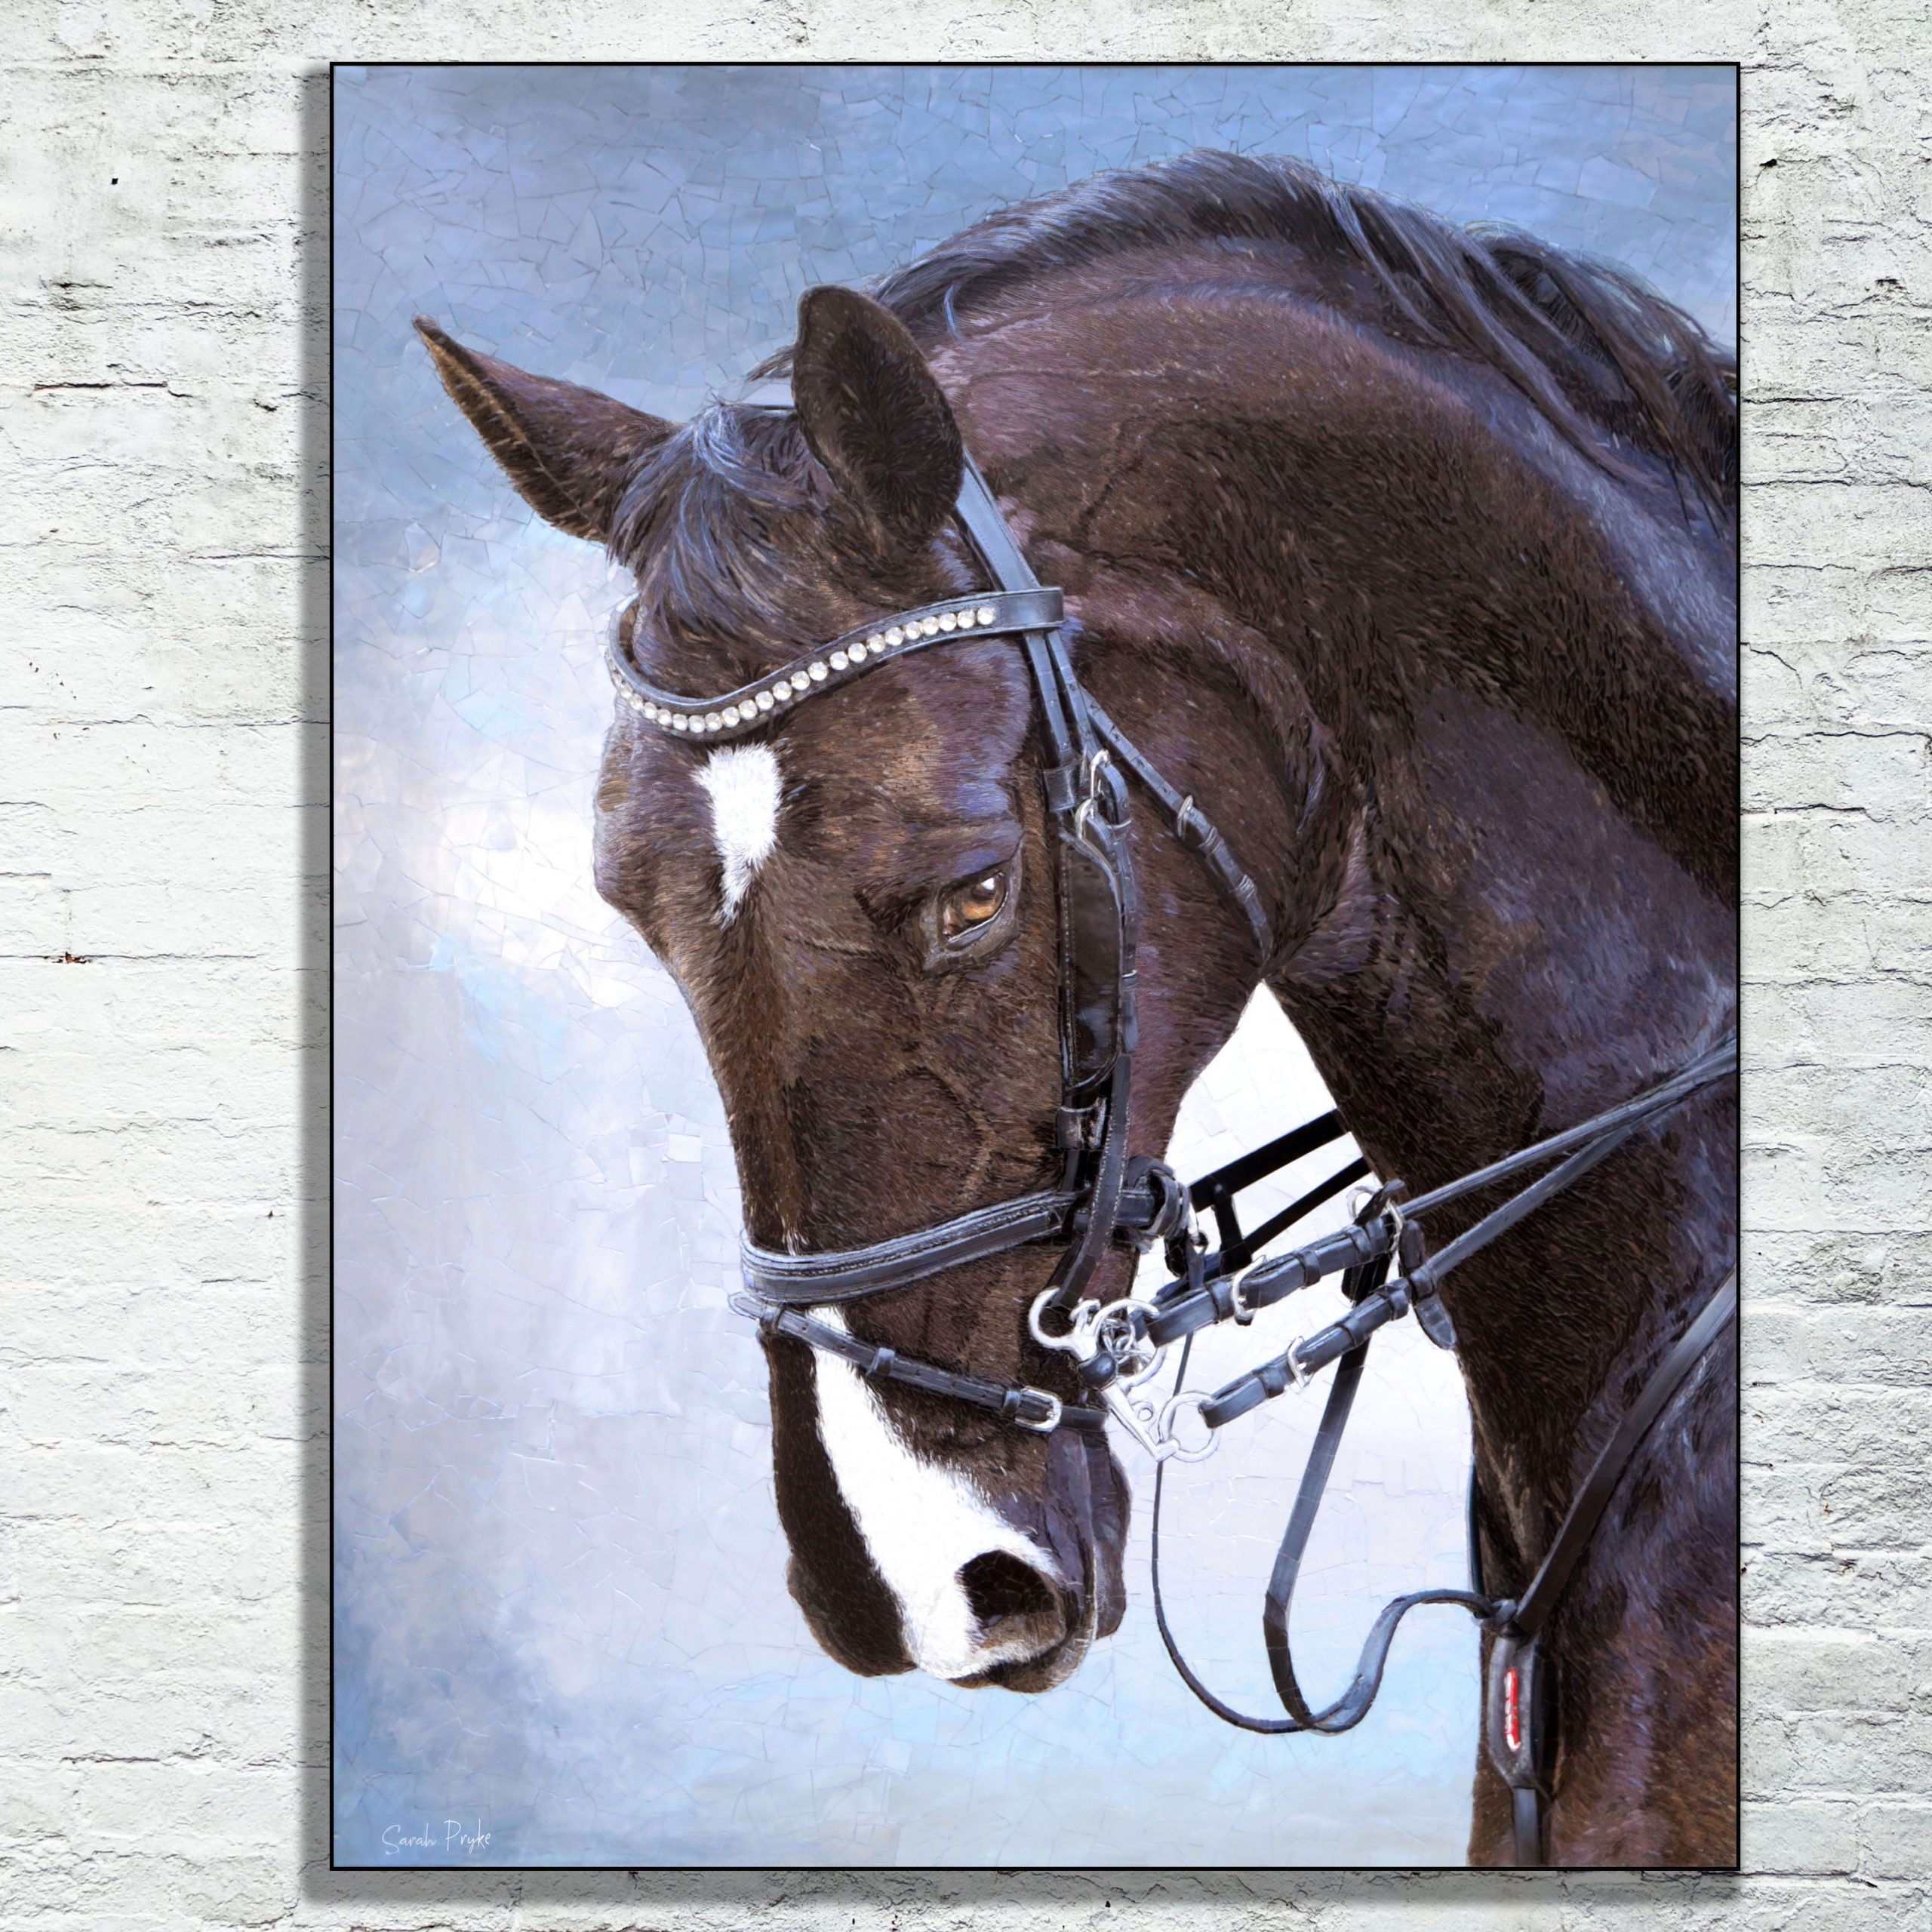 Title: “Greta”<br/> 
Size: 1.5x1.8 m<br/>
Price: COMMISSION (South Africa) <br/> 
Inspiration: Loved doing this HUGE portrait of South African showjumper, Greta! 